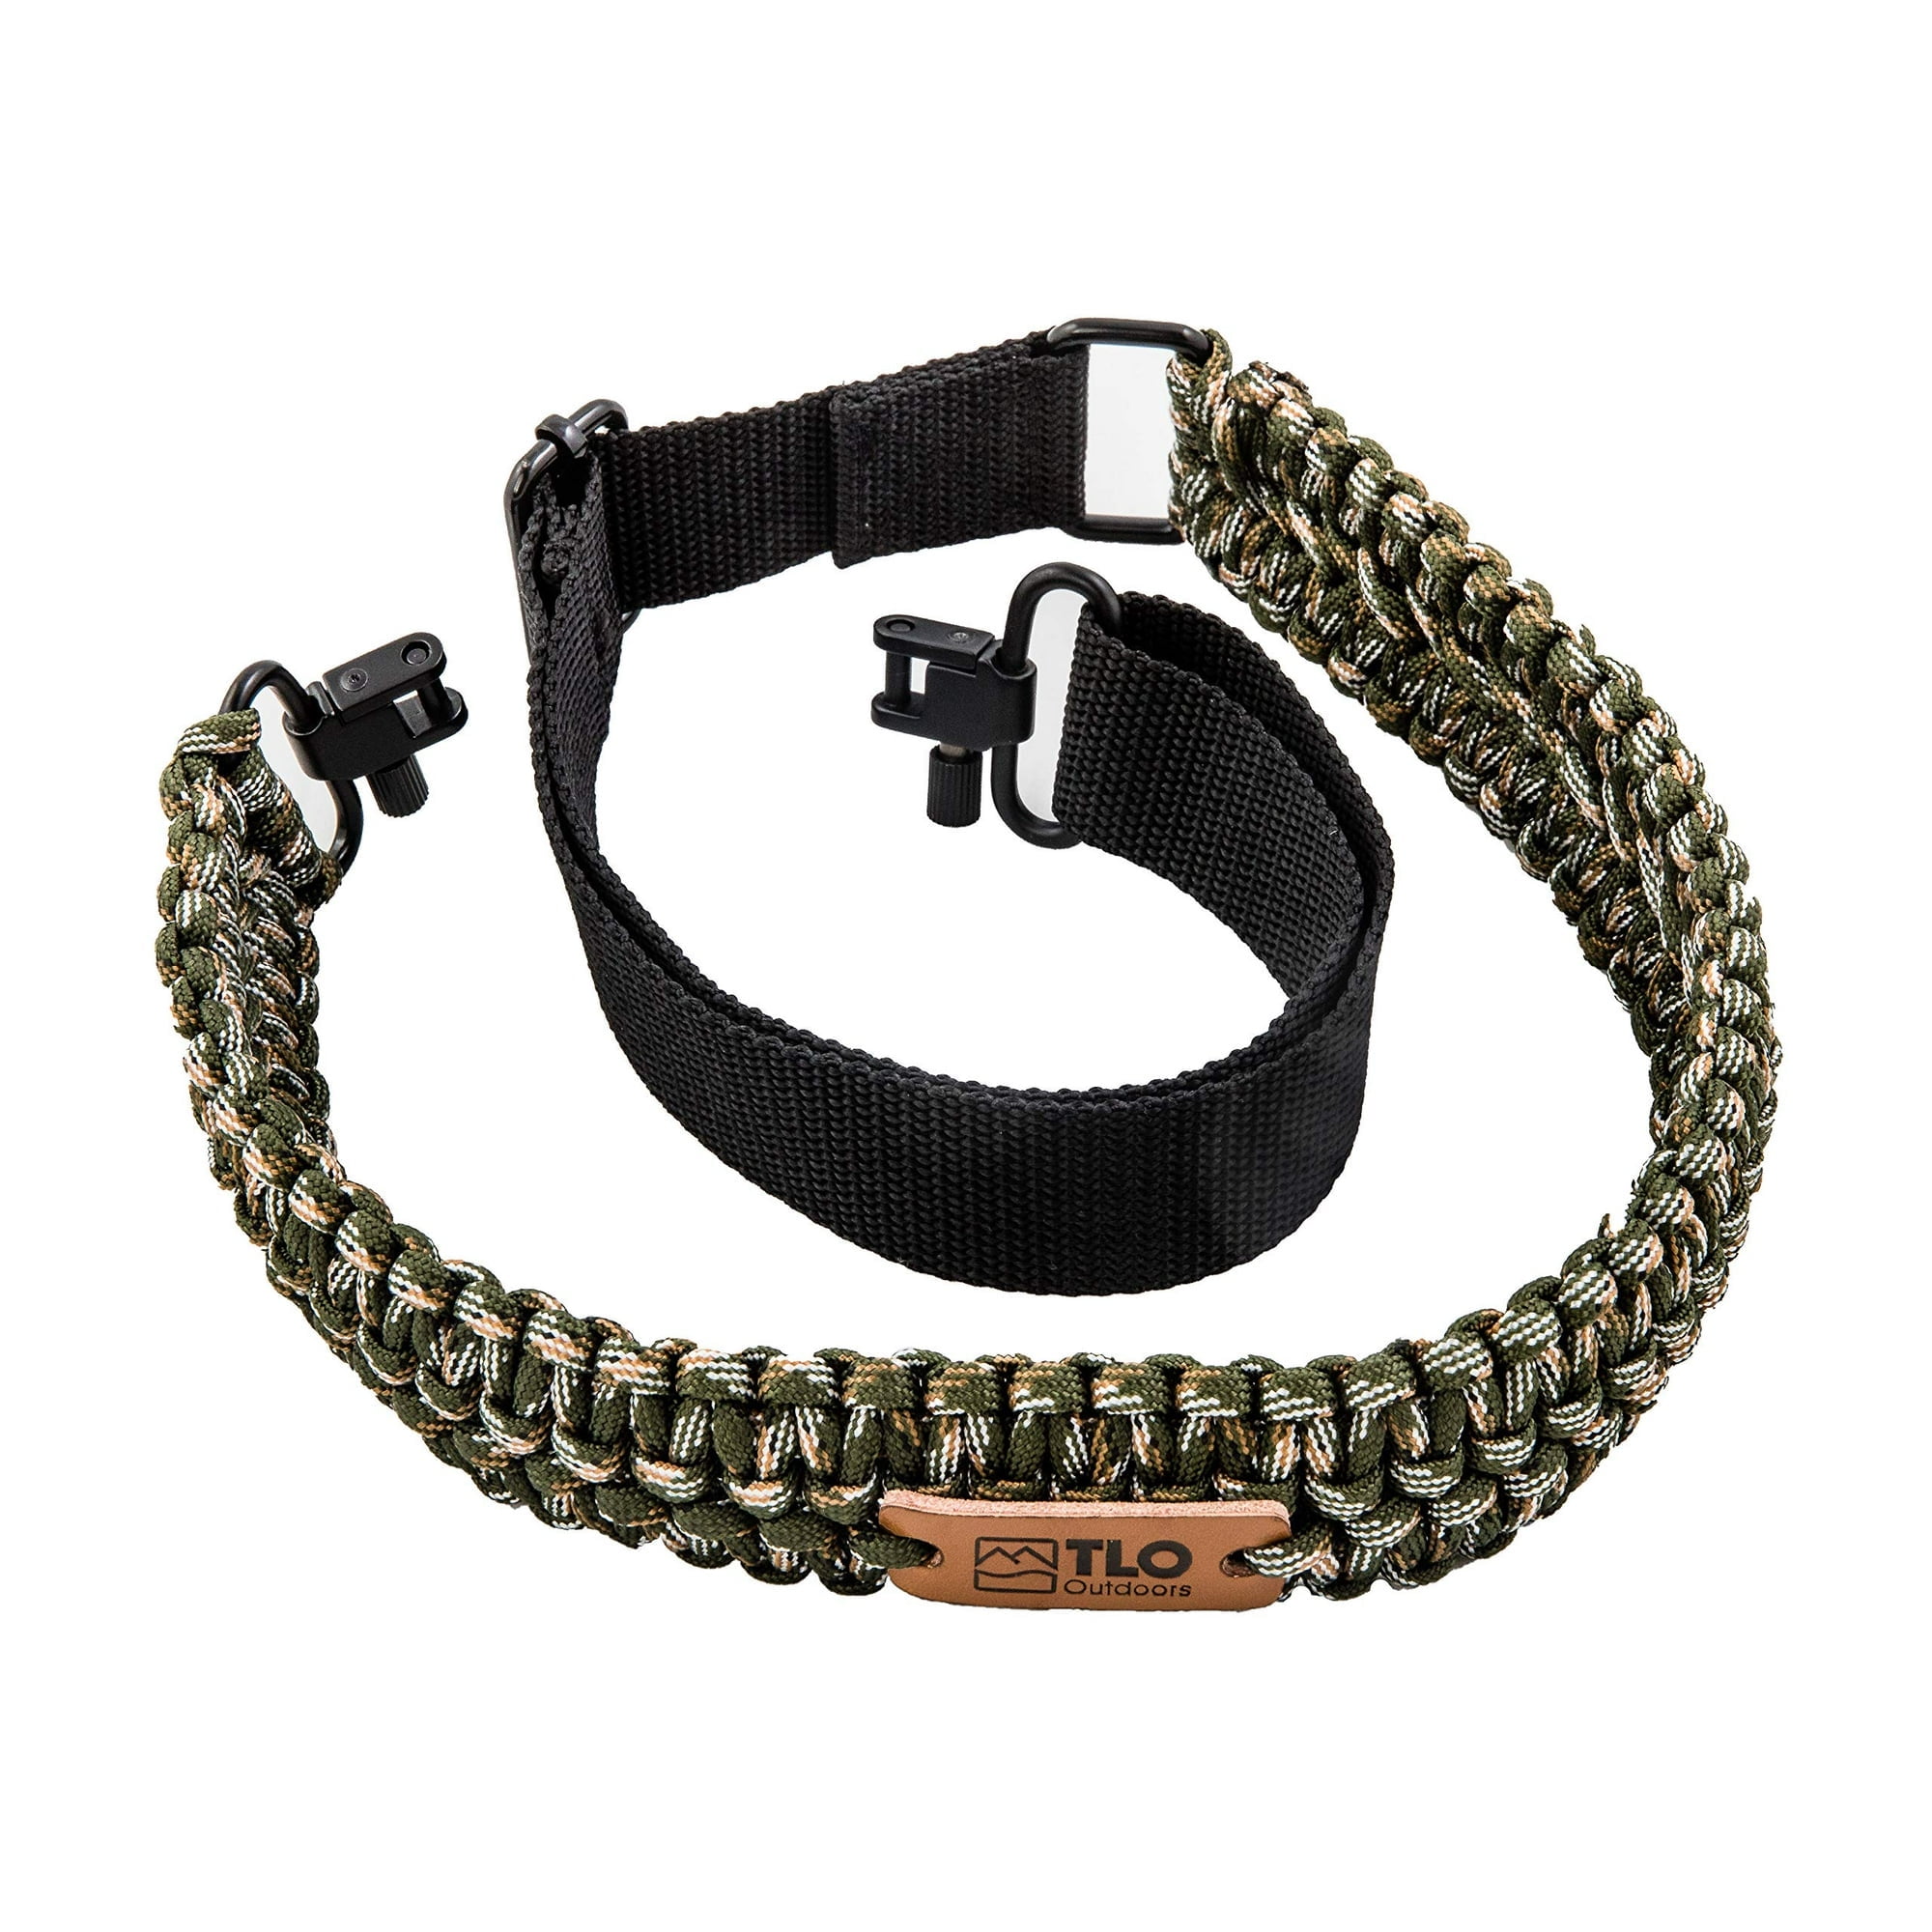 The Outdoor Connection Original Super-Sling 2+ with Talon Swivels, Black,  1.25in 